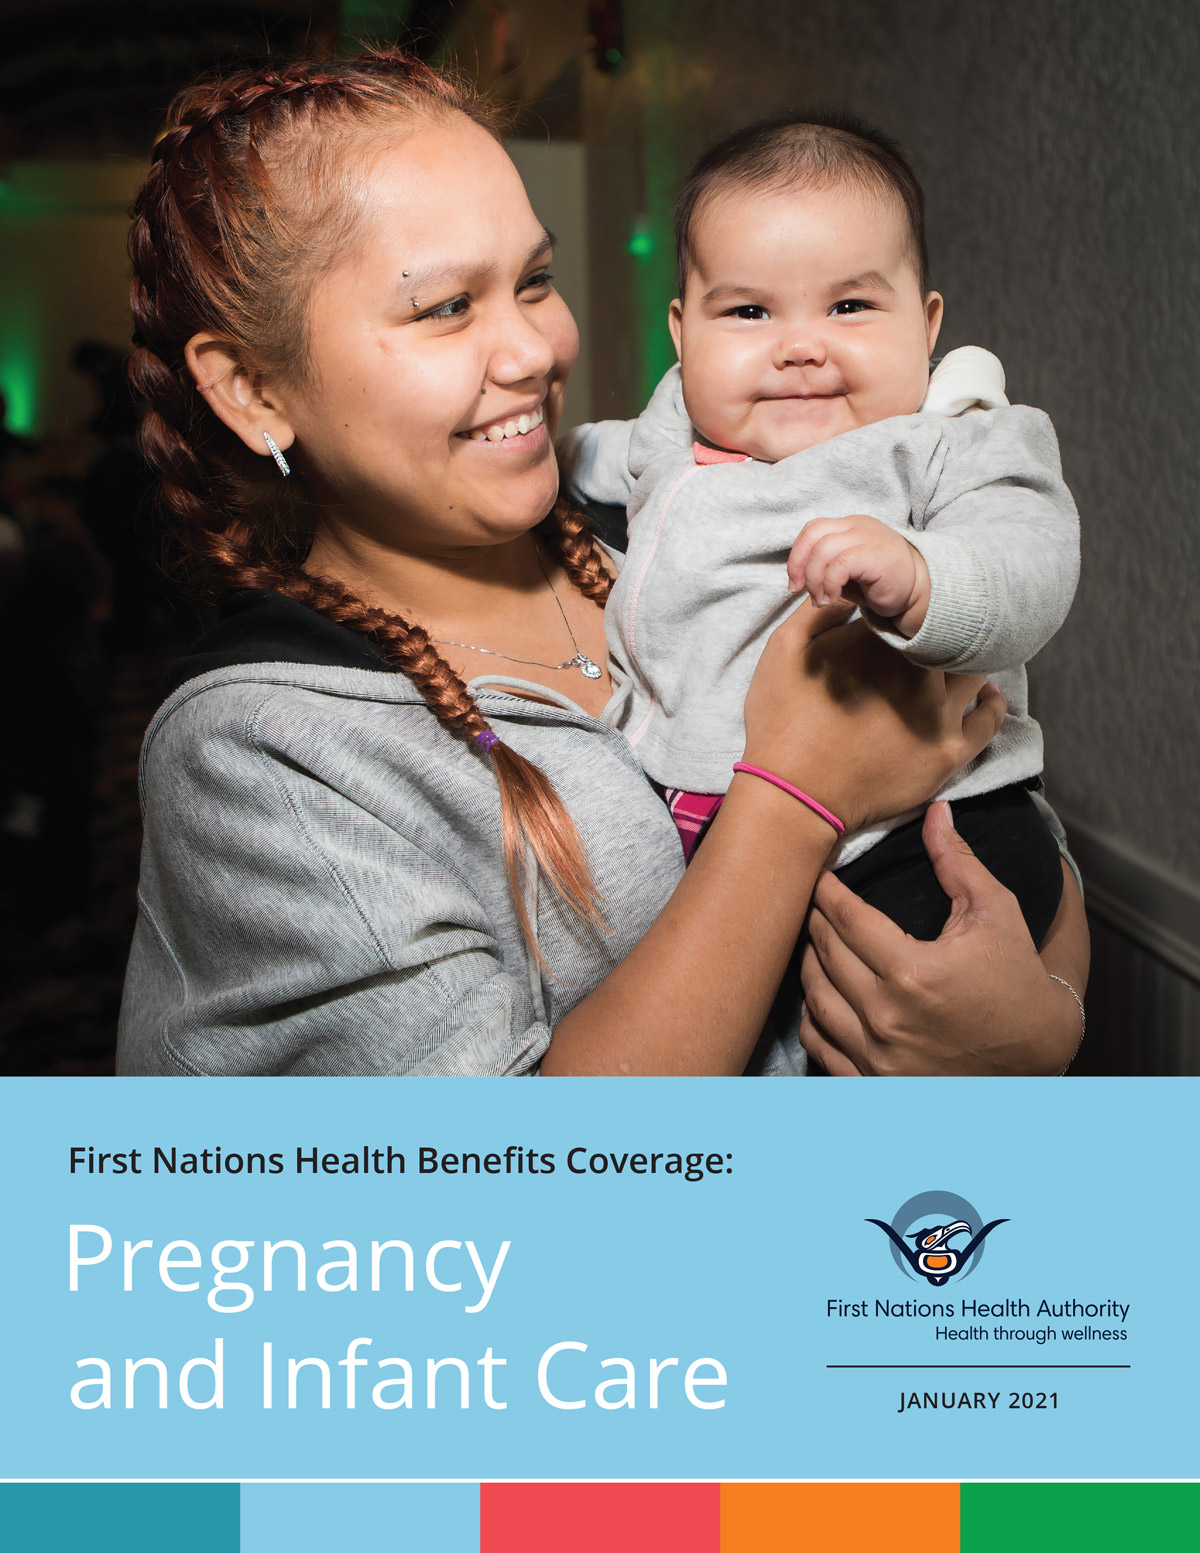 FNHA-First-Nations-Health-Benefits-Pregnancy-and-Infant-Care-Cover.jpg